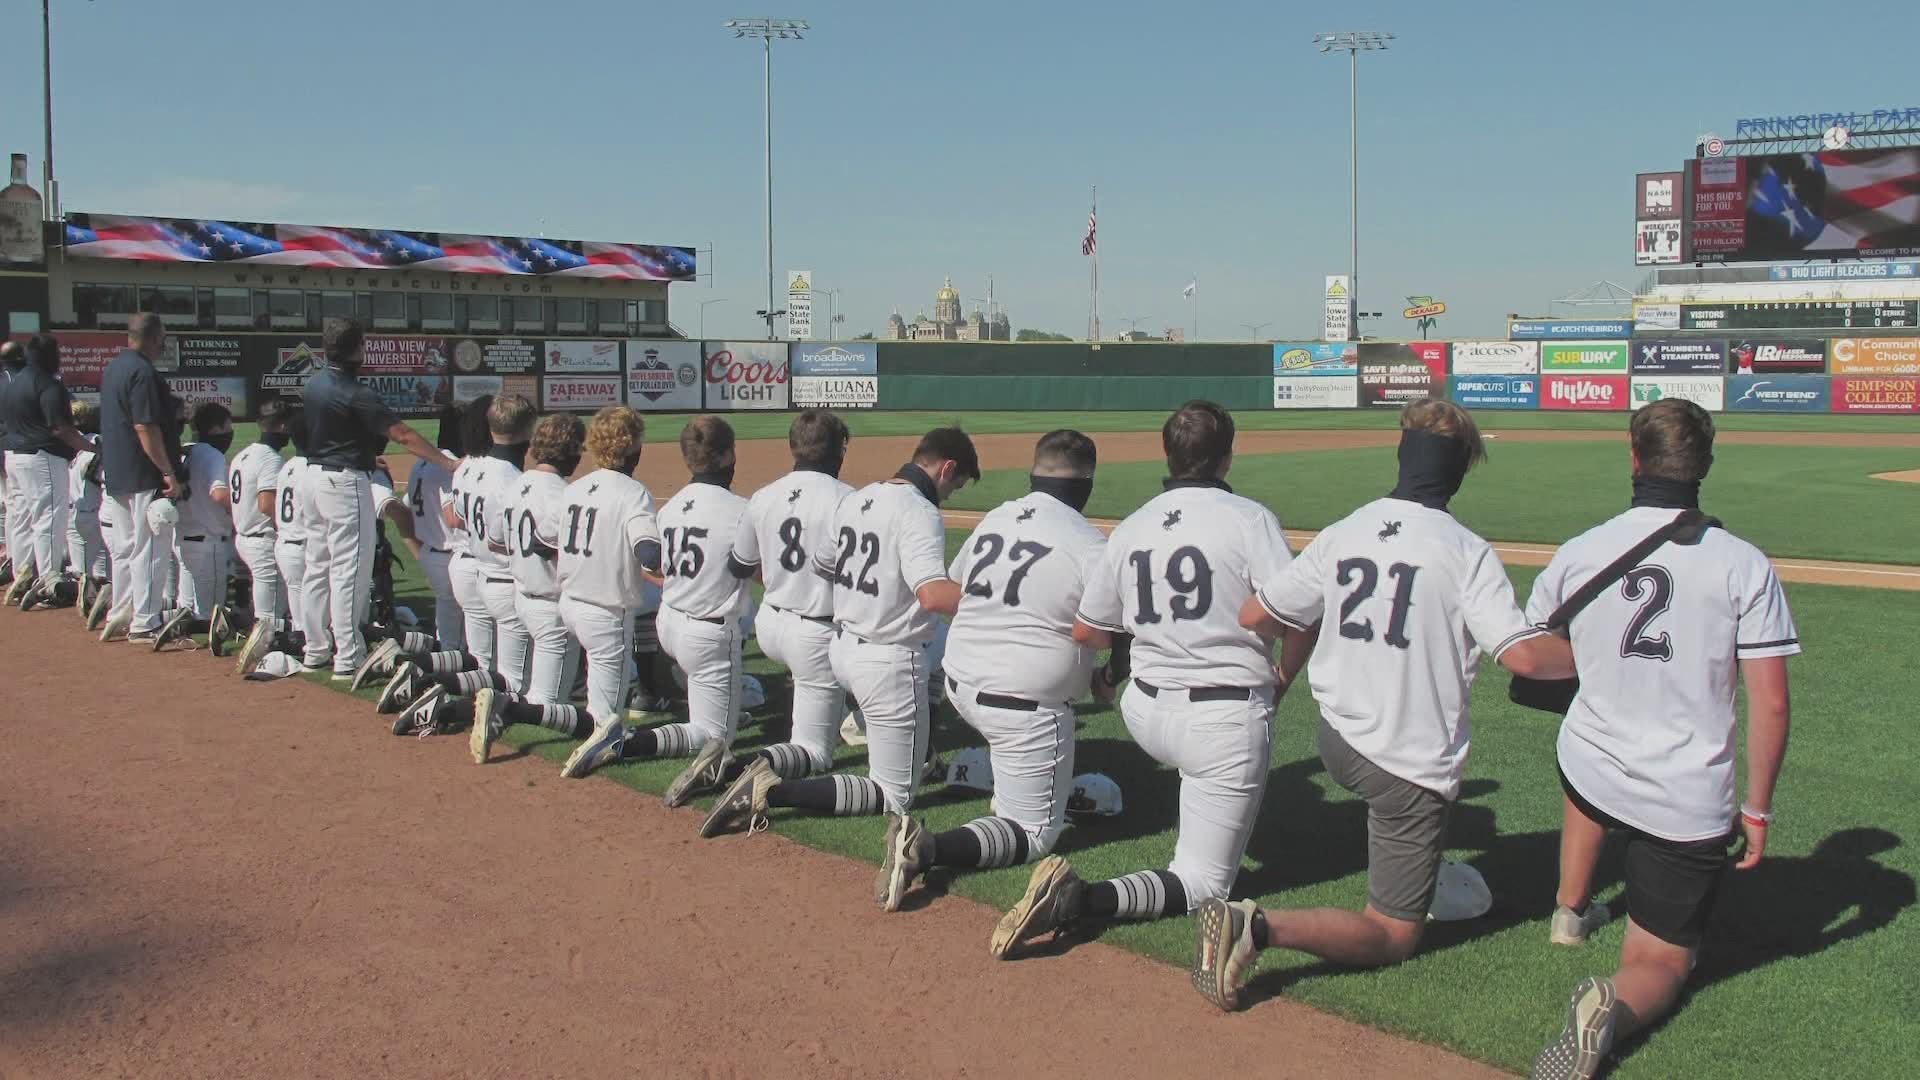 The Roosevelt Baseball team opened their season at Principal Park with a doubleheader against Centennial. The team chose to kneel during the National Anthem.